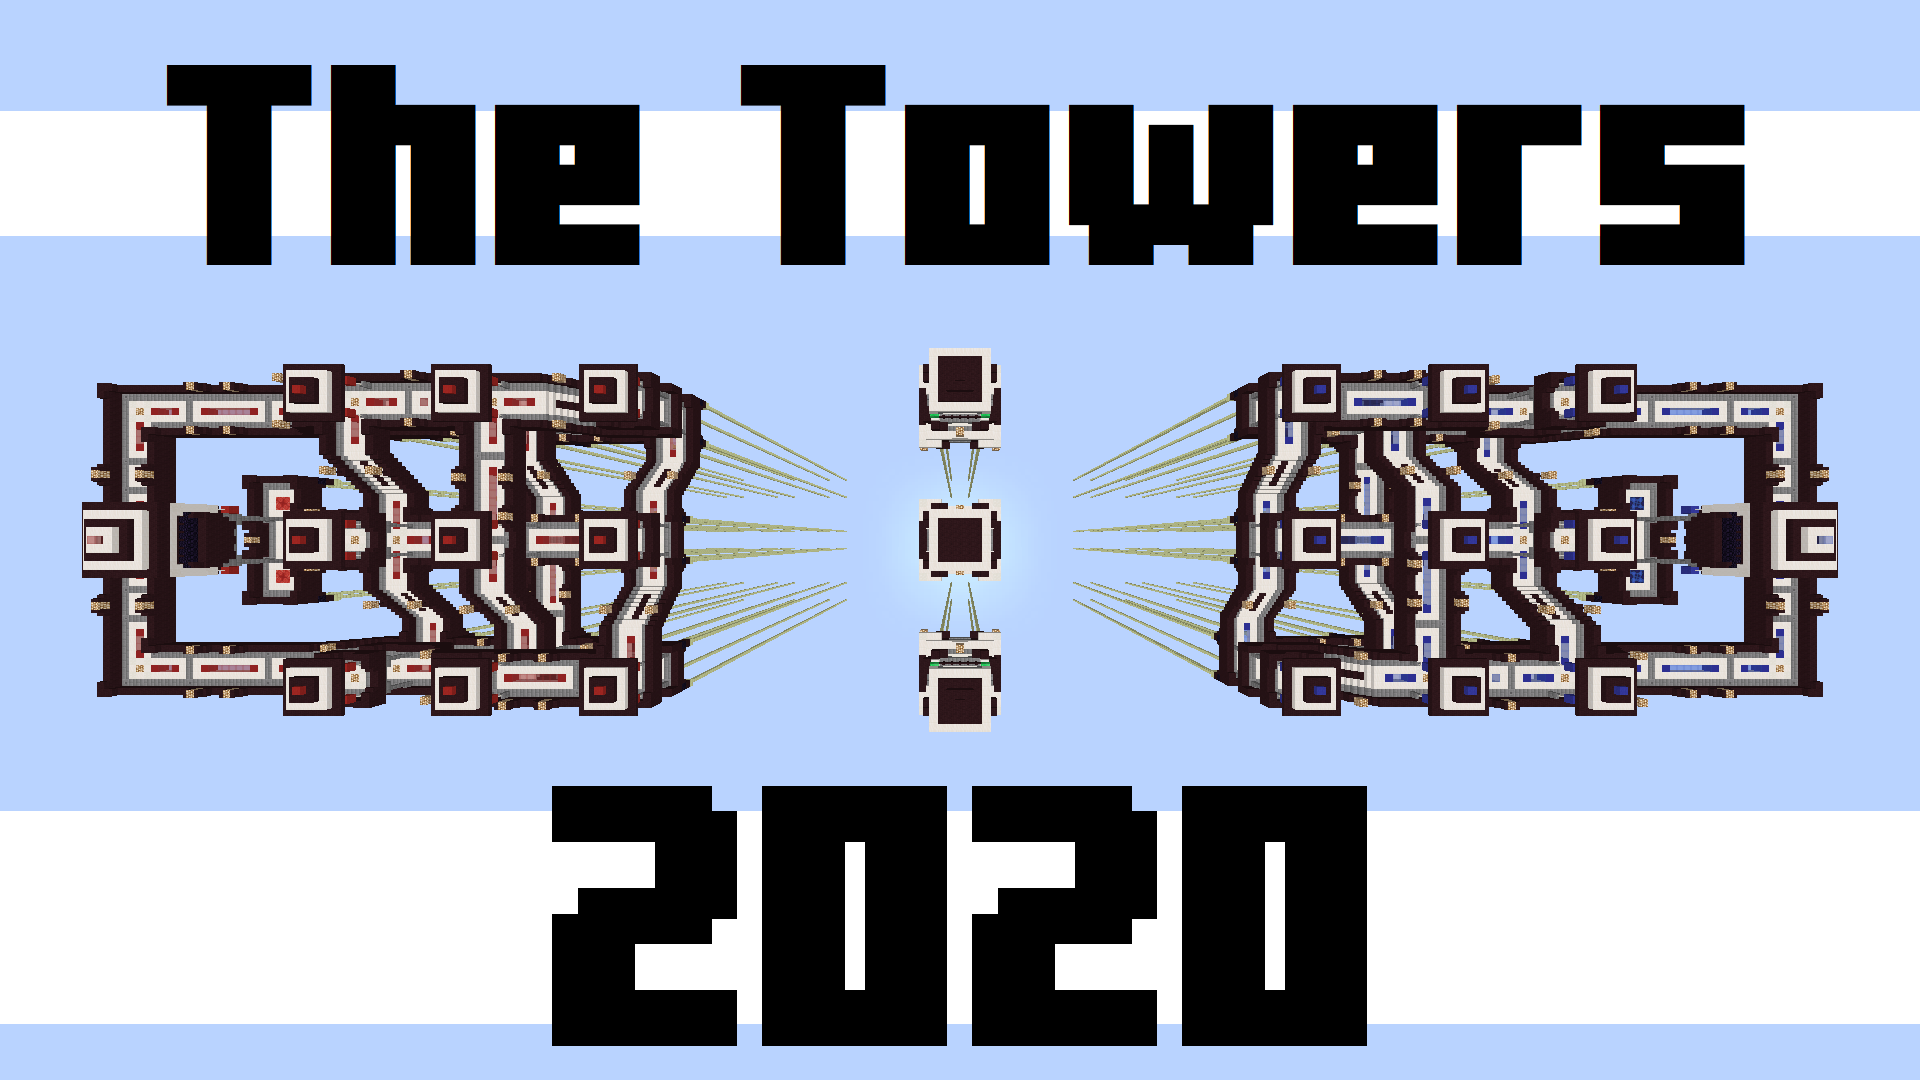 Download The Towers 2020 for Minecraft 1.16